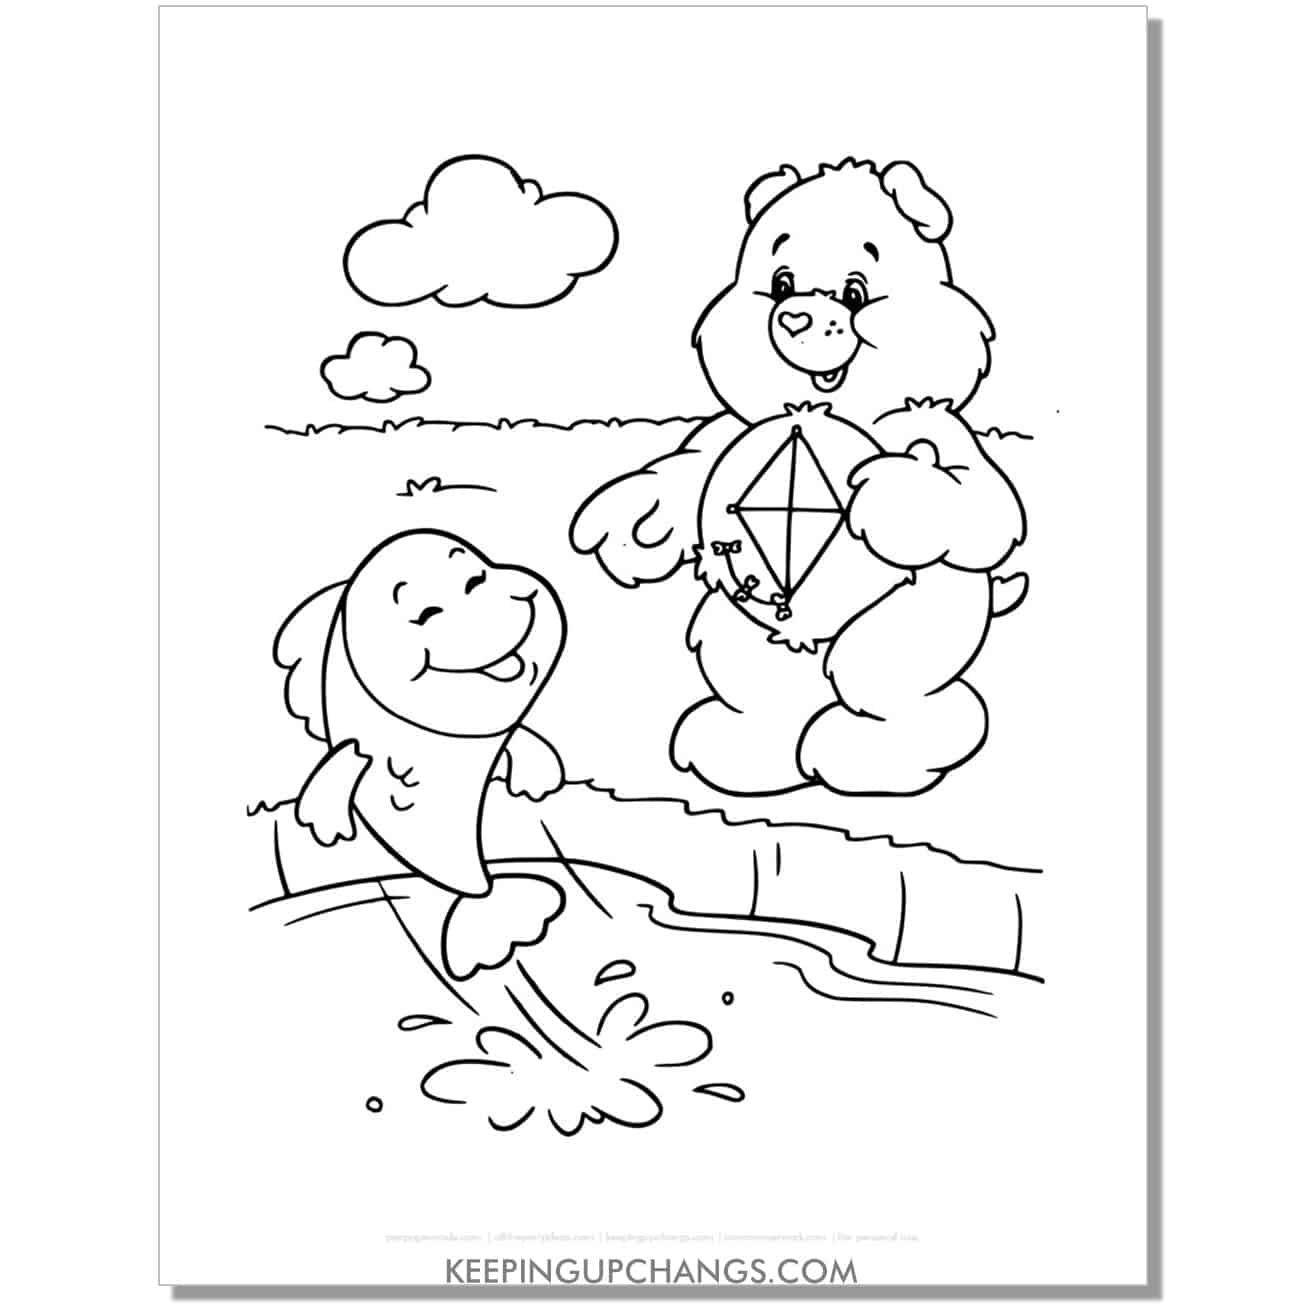 do your best bear at lake with fish care bear coloring page, sheet.